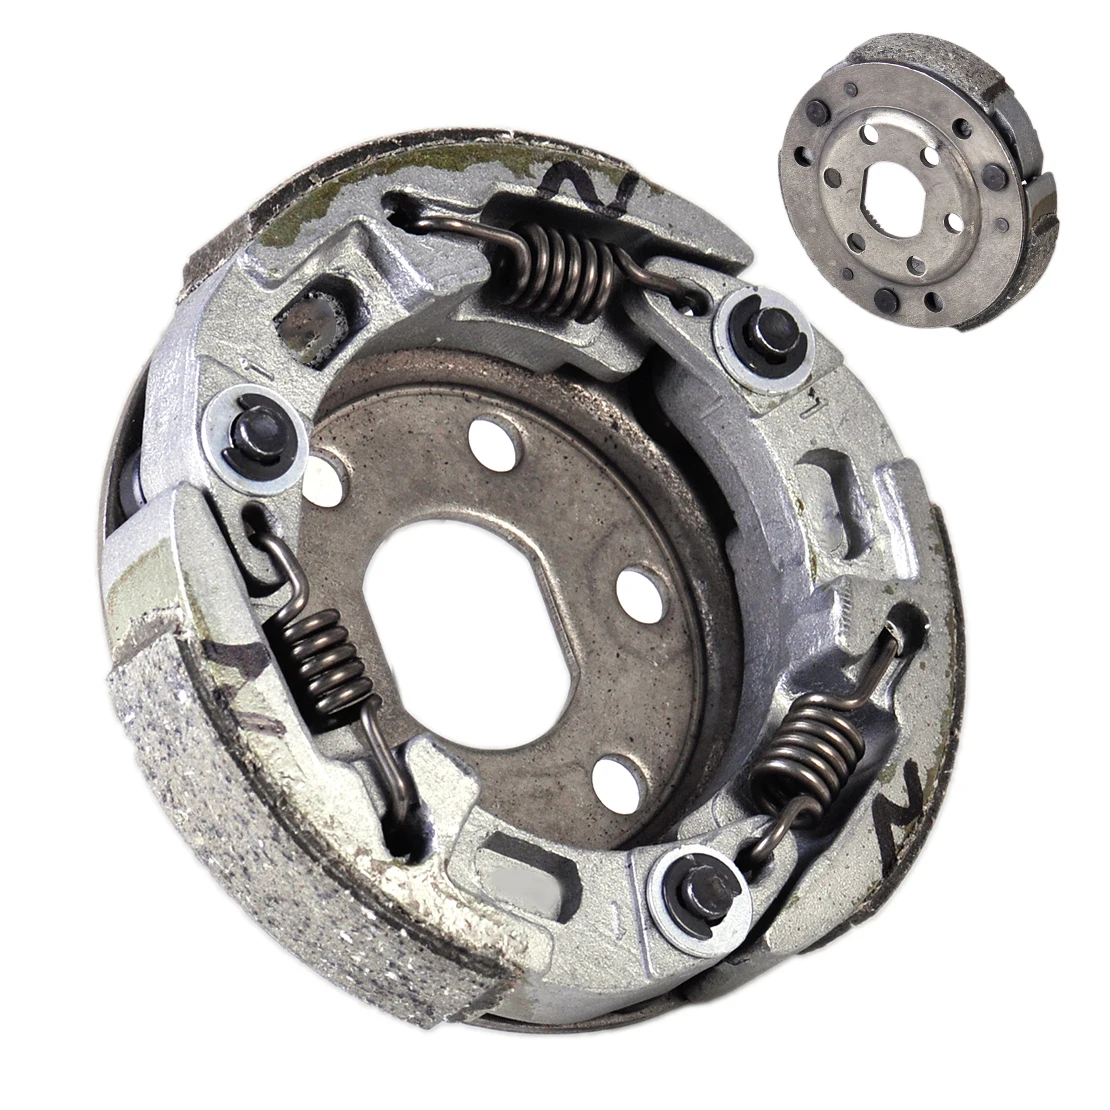 

DWCX High Performance Racing Clutch Motorcycle Replacement for GY6 139QMB 50cc Scooter ATV Quad Moped Loncin Yamaha Honda Suzuki